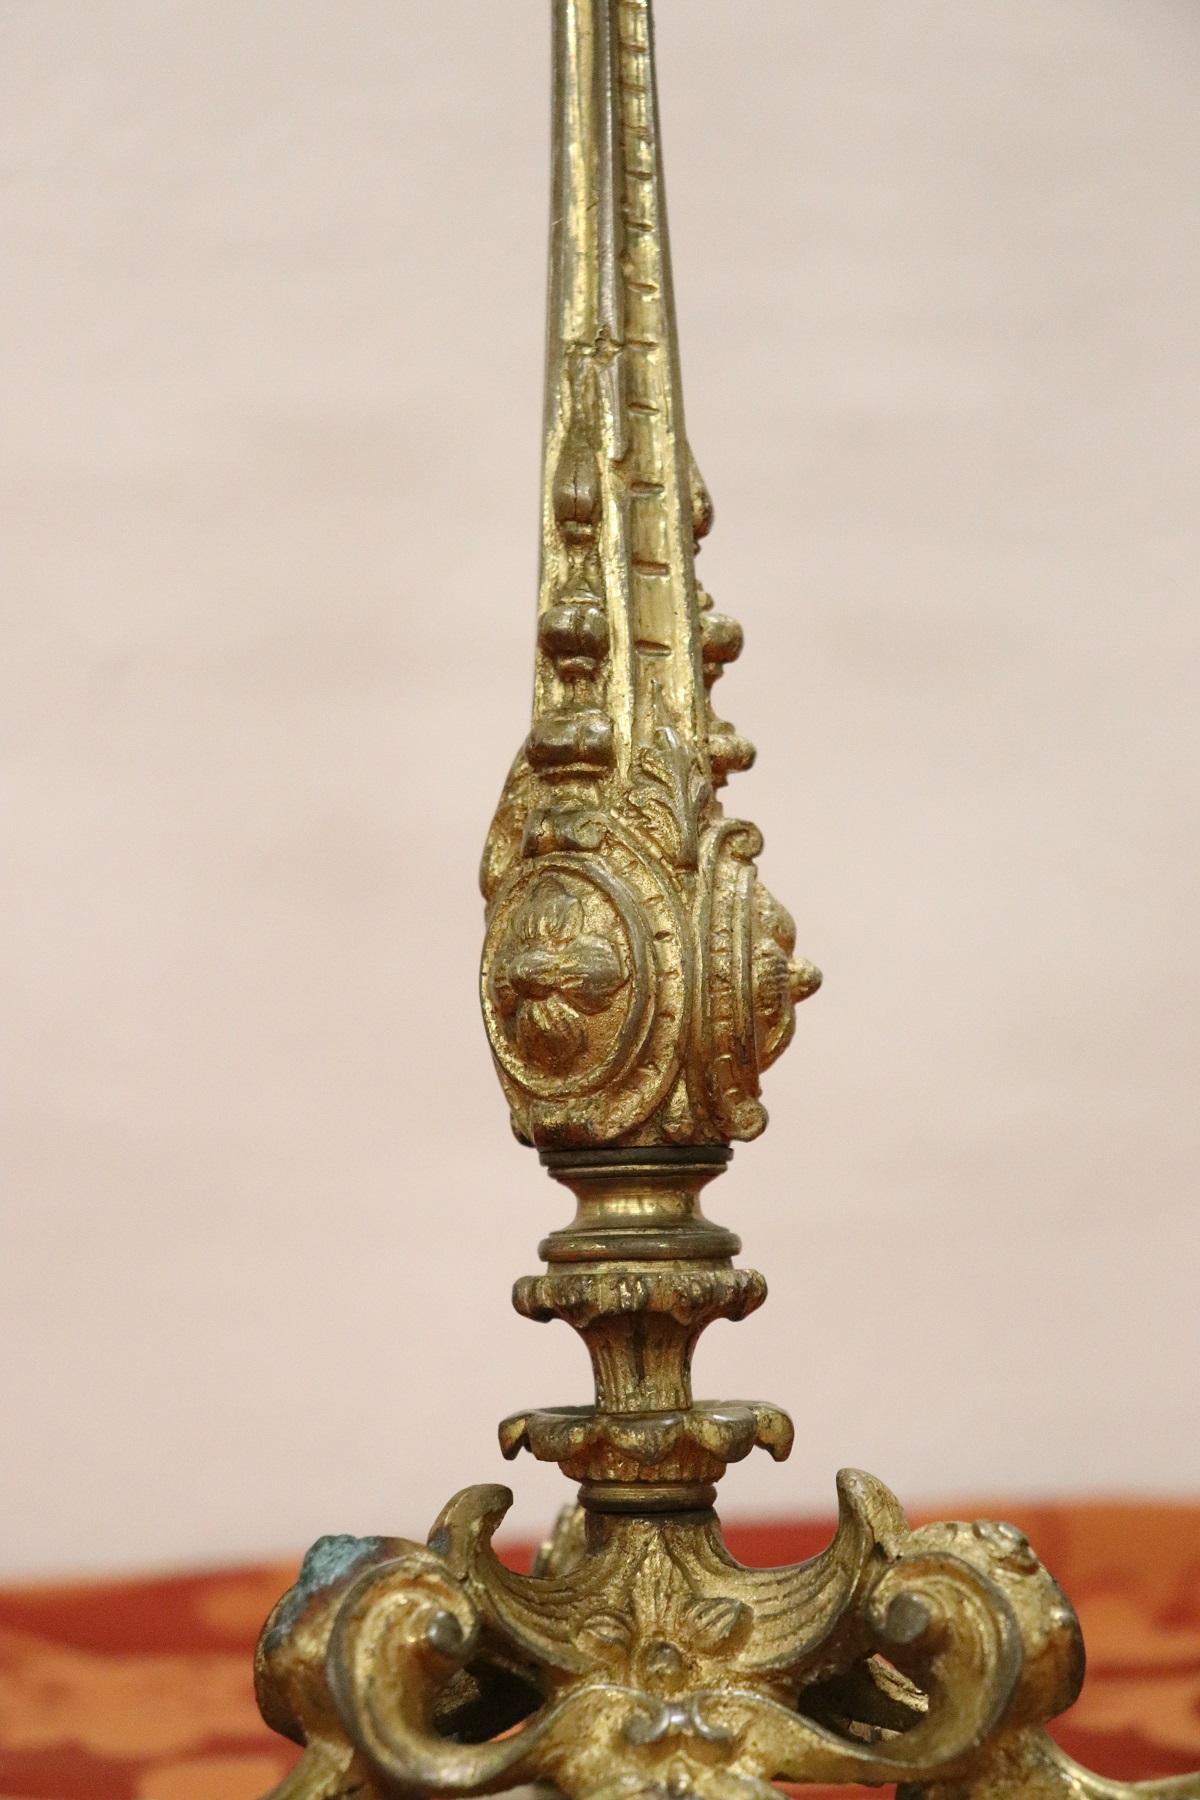 19th Century French Napoleon III Pair of Candelabras in Gilded Bronze 4 Arms 9